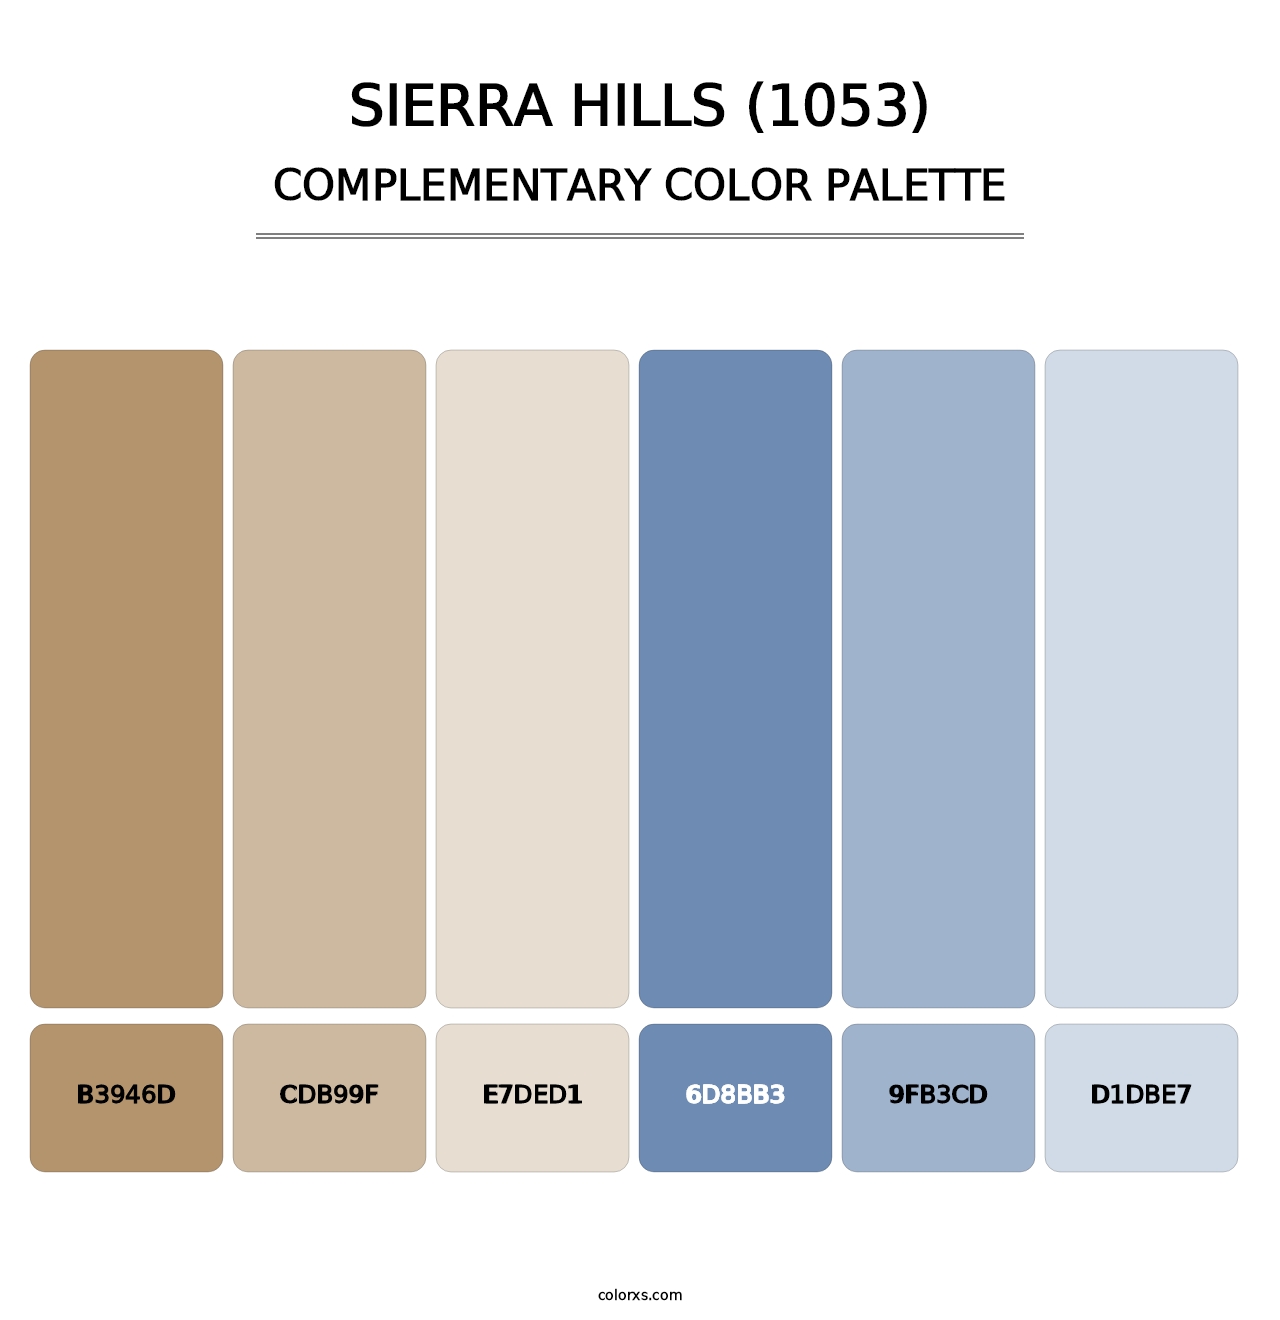 Sierra Hills (1053) - Complementary Color Palette